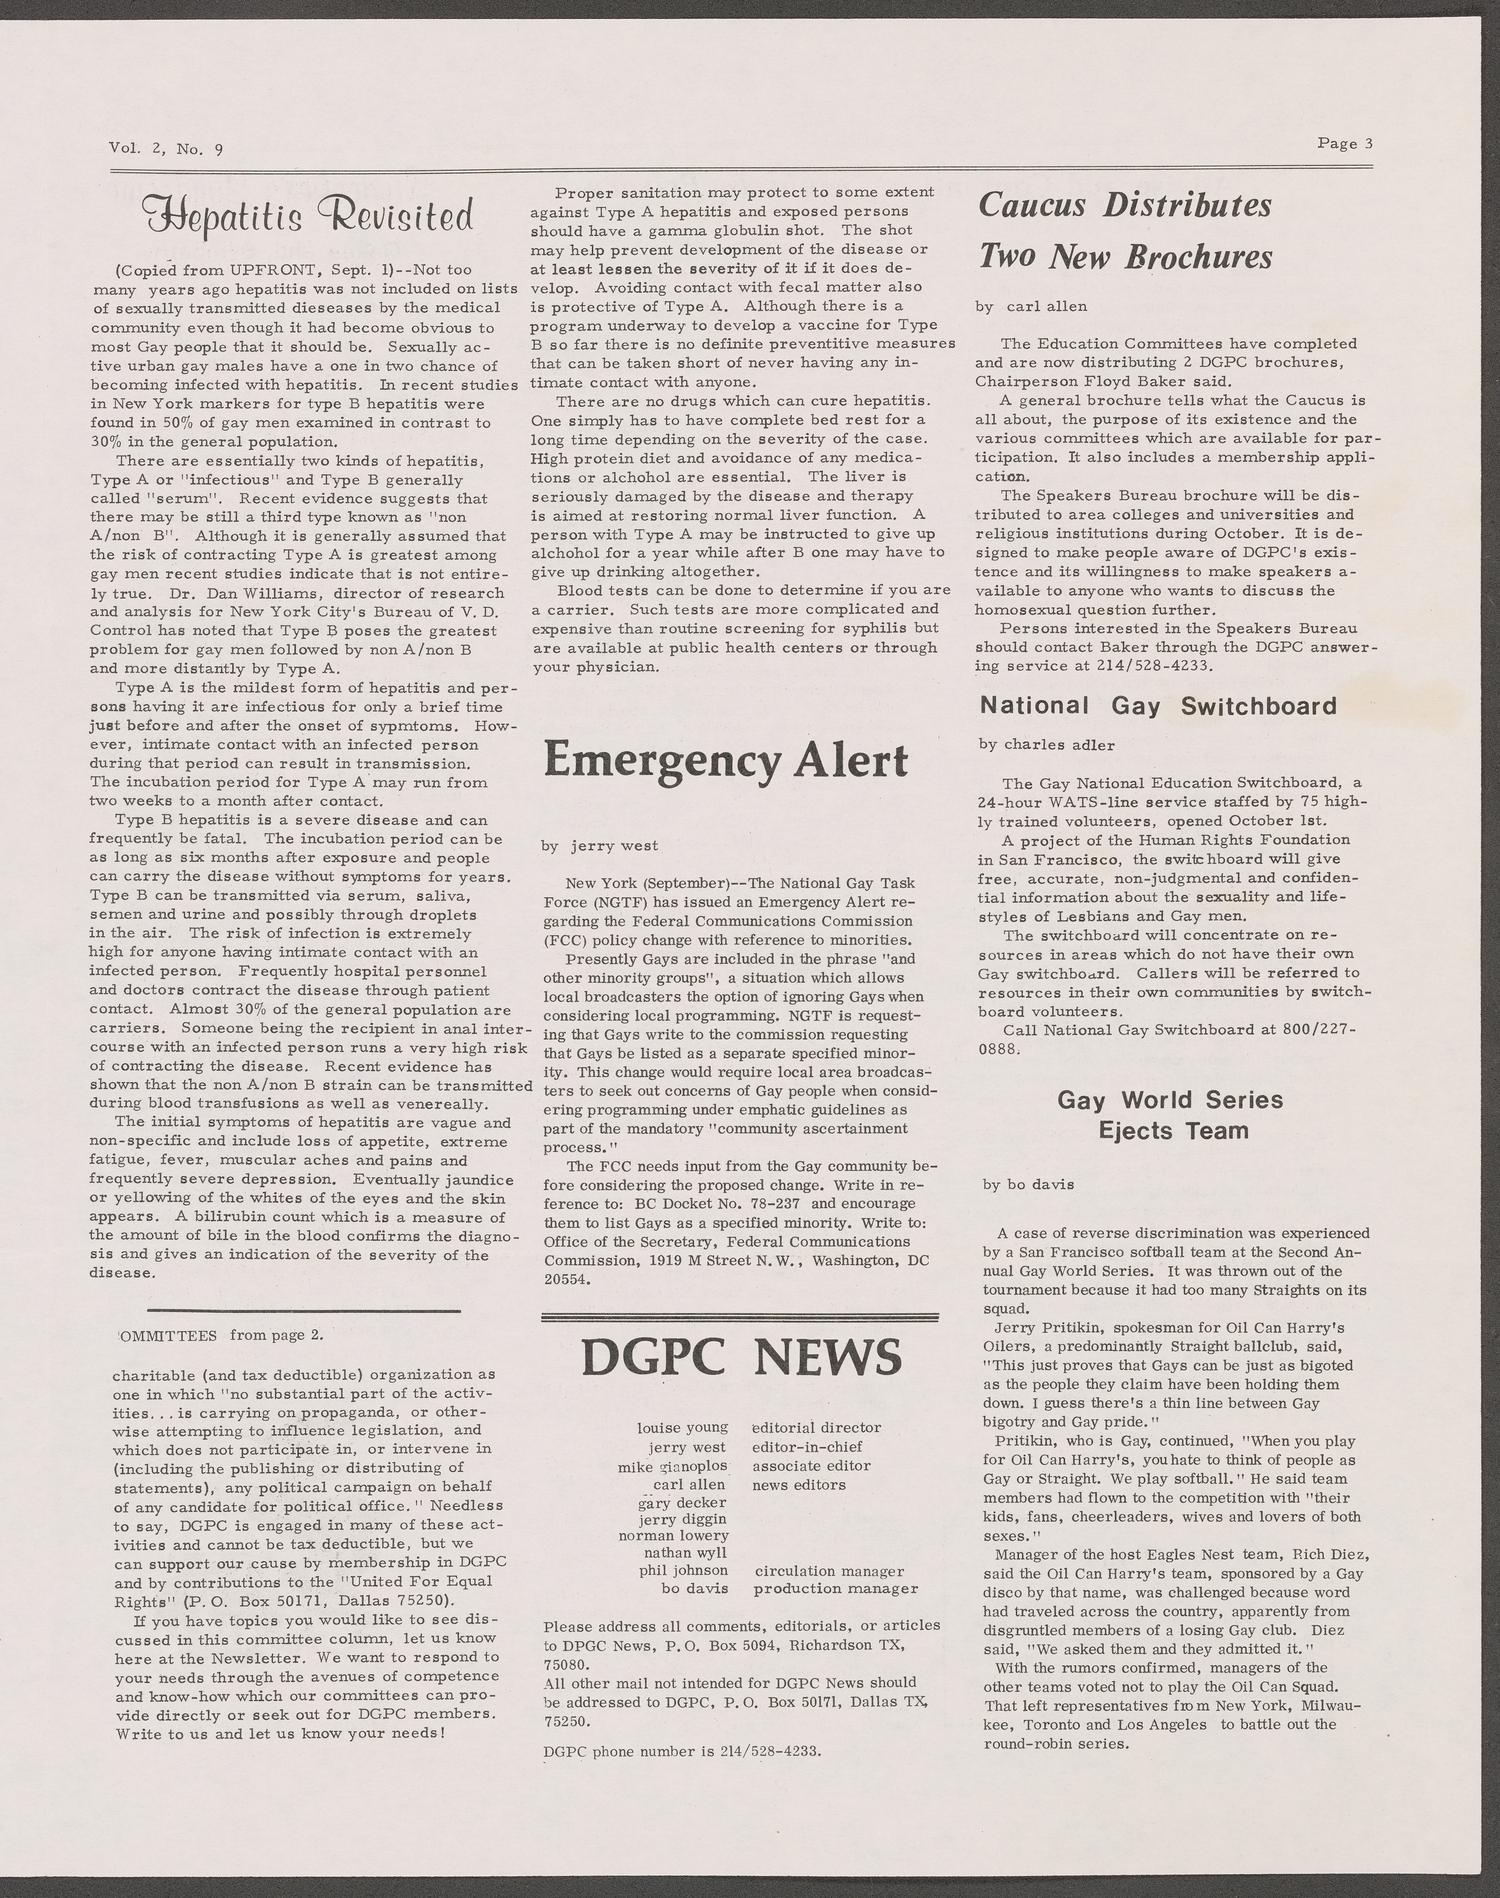 [The Dallas Gay Political Caucus News, Volume 2, Number 9, October 1978]
                                                
                                                    [Sequence #]: 3 of 4
                                                